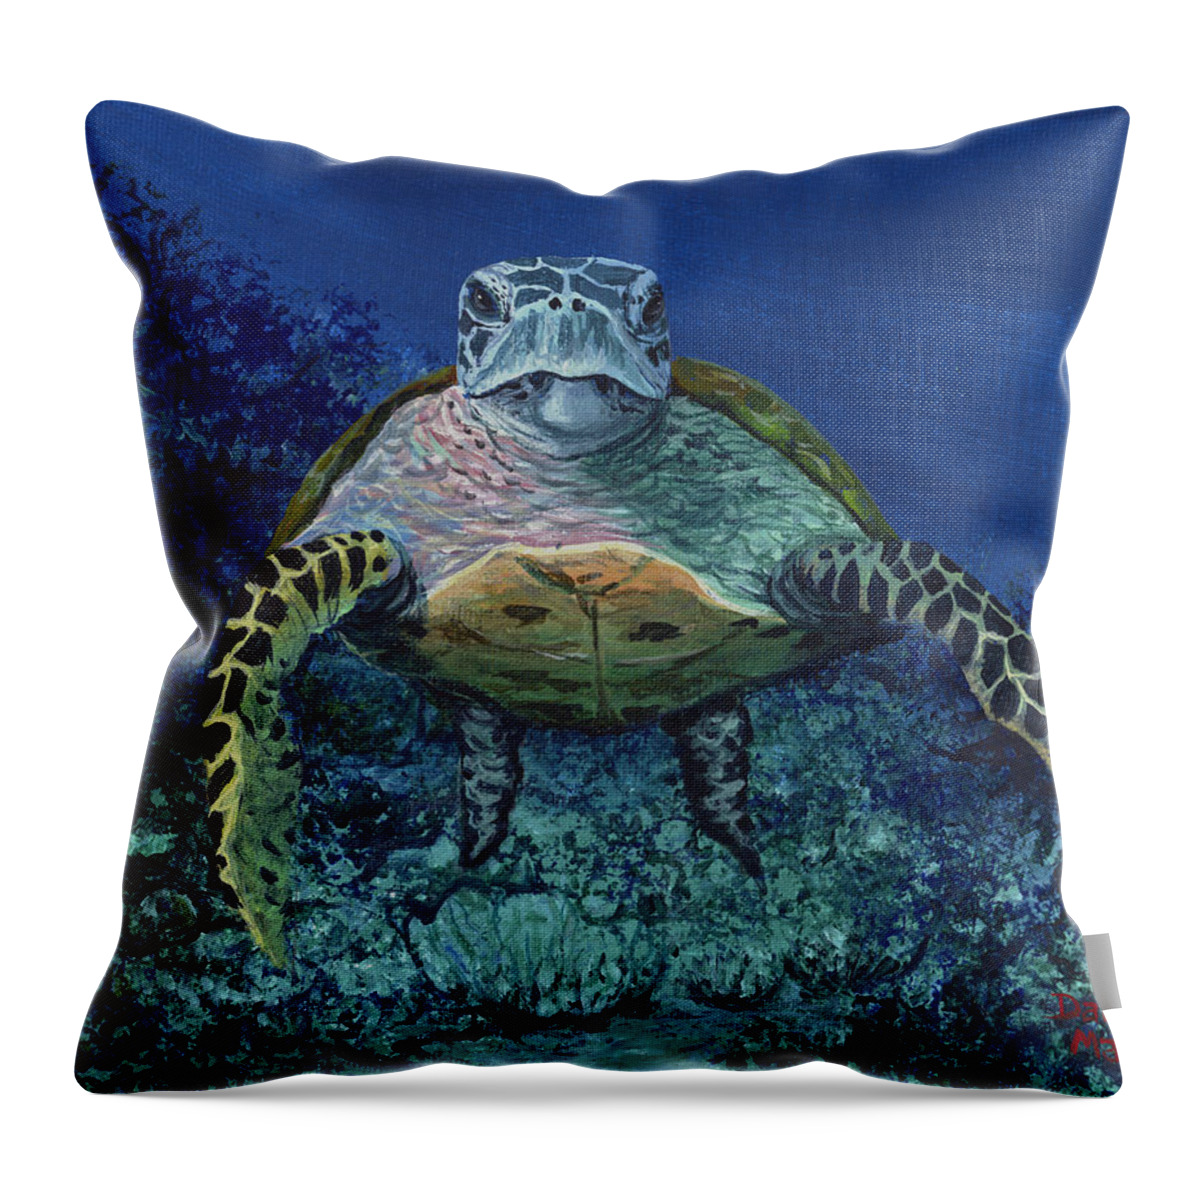 Hawaiian Green Sea Turtle Throw Pillow featuring the painting Home Of The Honu by Darice Machel McGuire